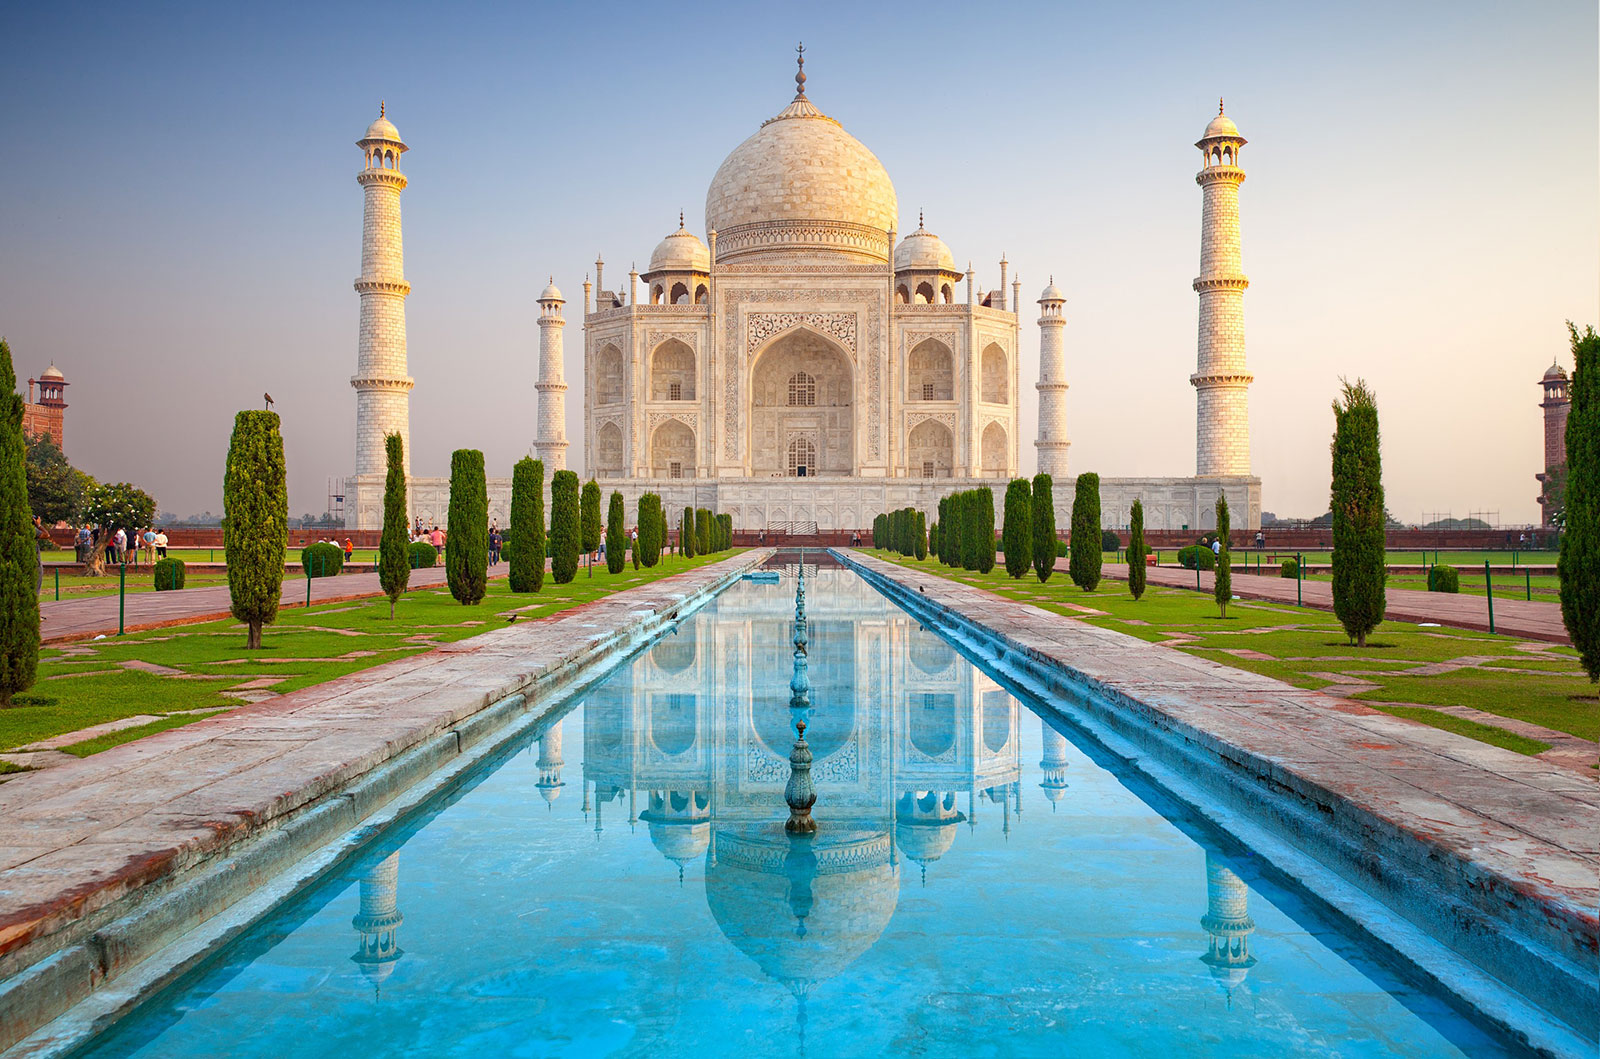 Can You Pass This Impossible Geography Quiz? Taj Mahal, India